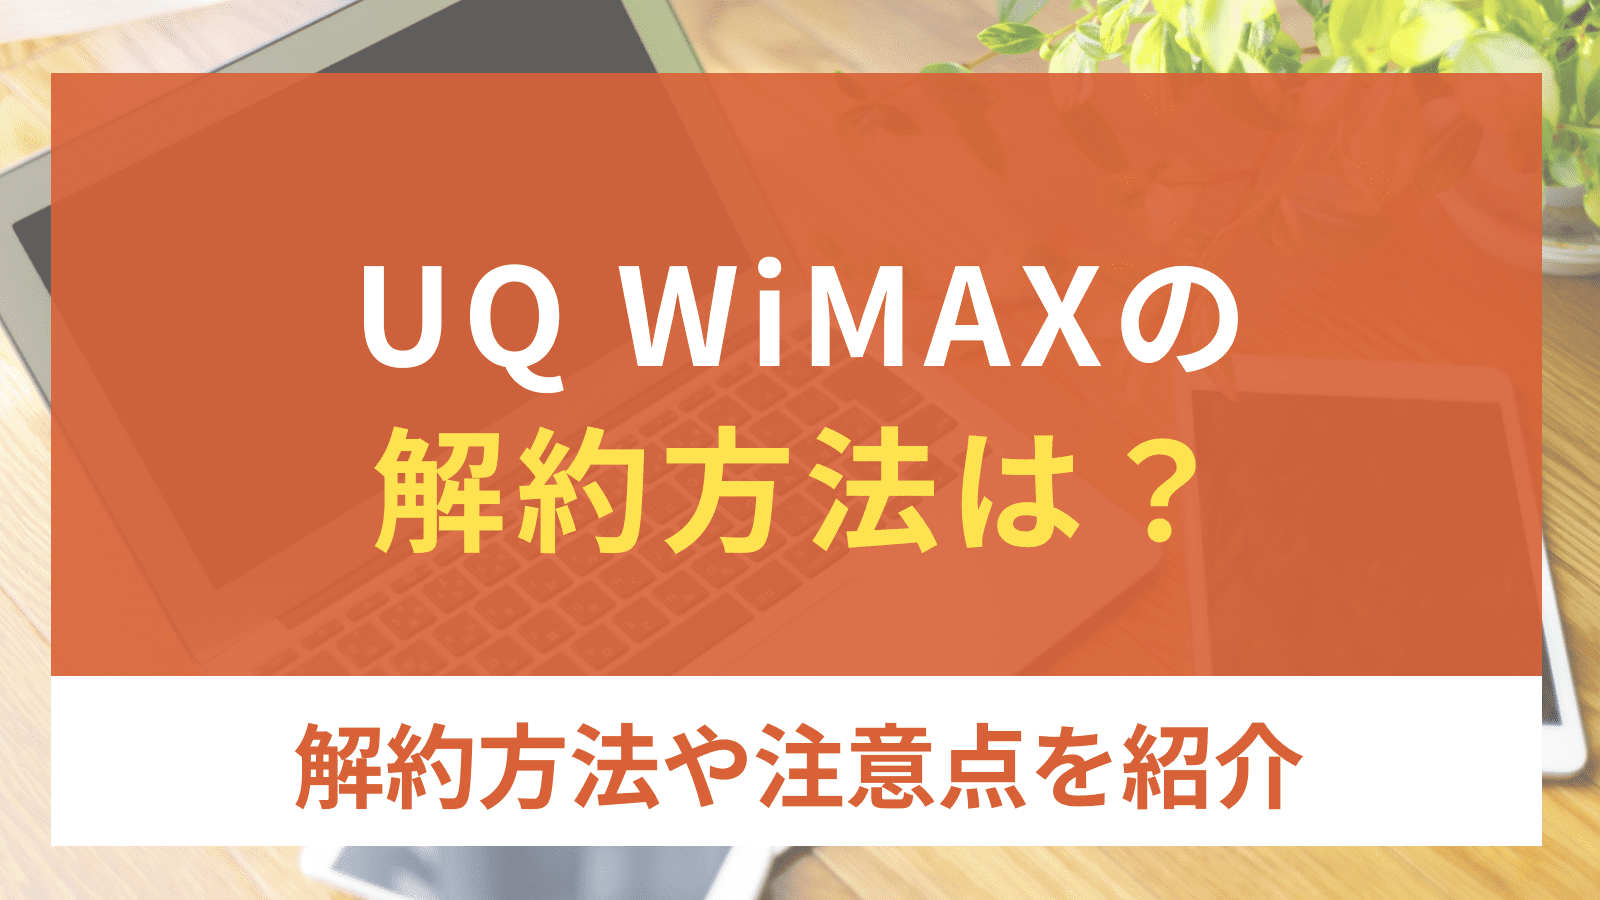 UQ WiMAXの解約方法は？解約方法や解約時の注意点を紹介